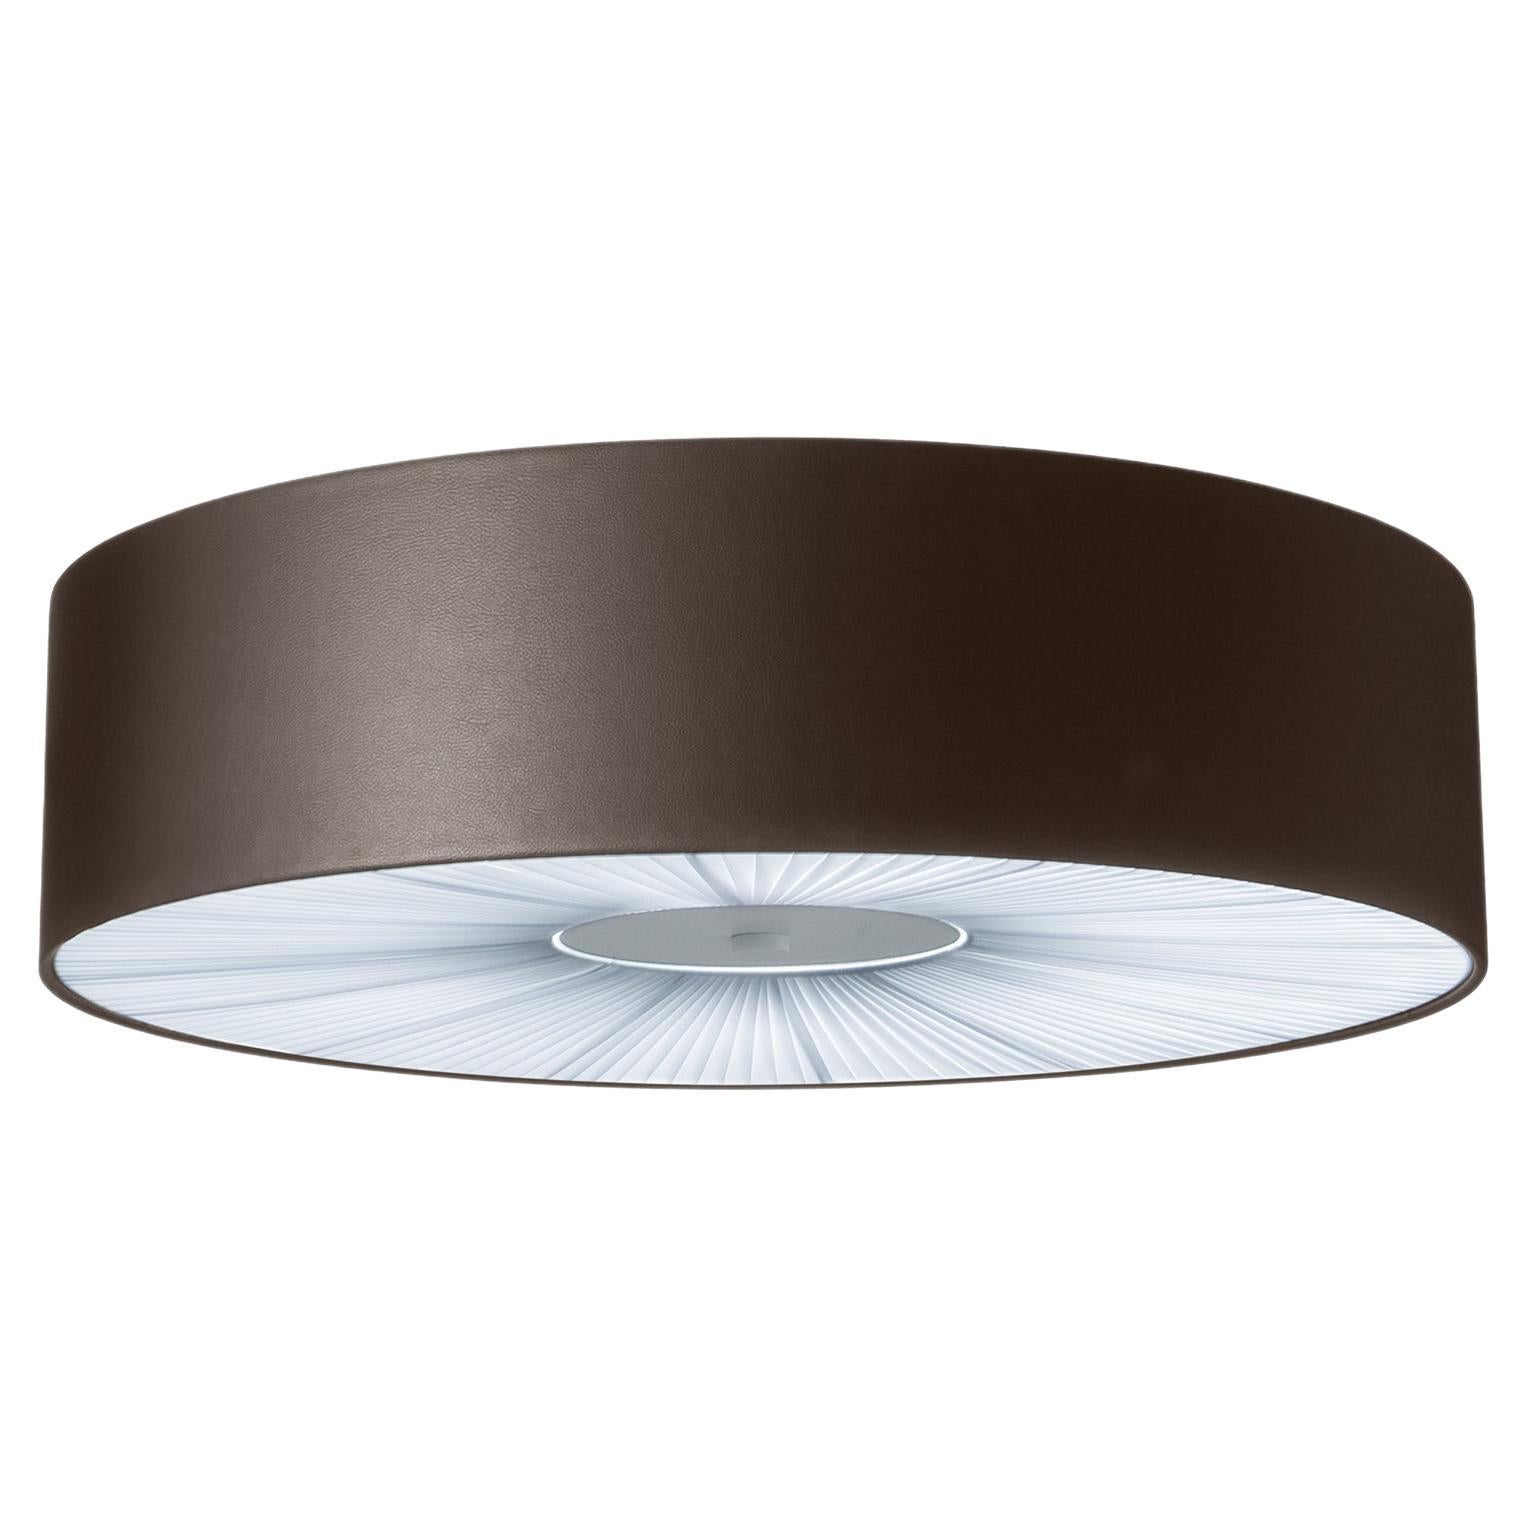 Axolight Skin Extra Large Flush Mount in Brown by Manuel & Vanessa Vivian For Sale